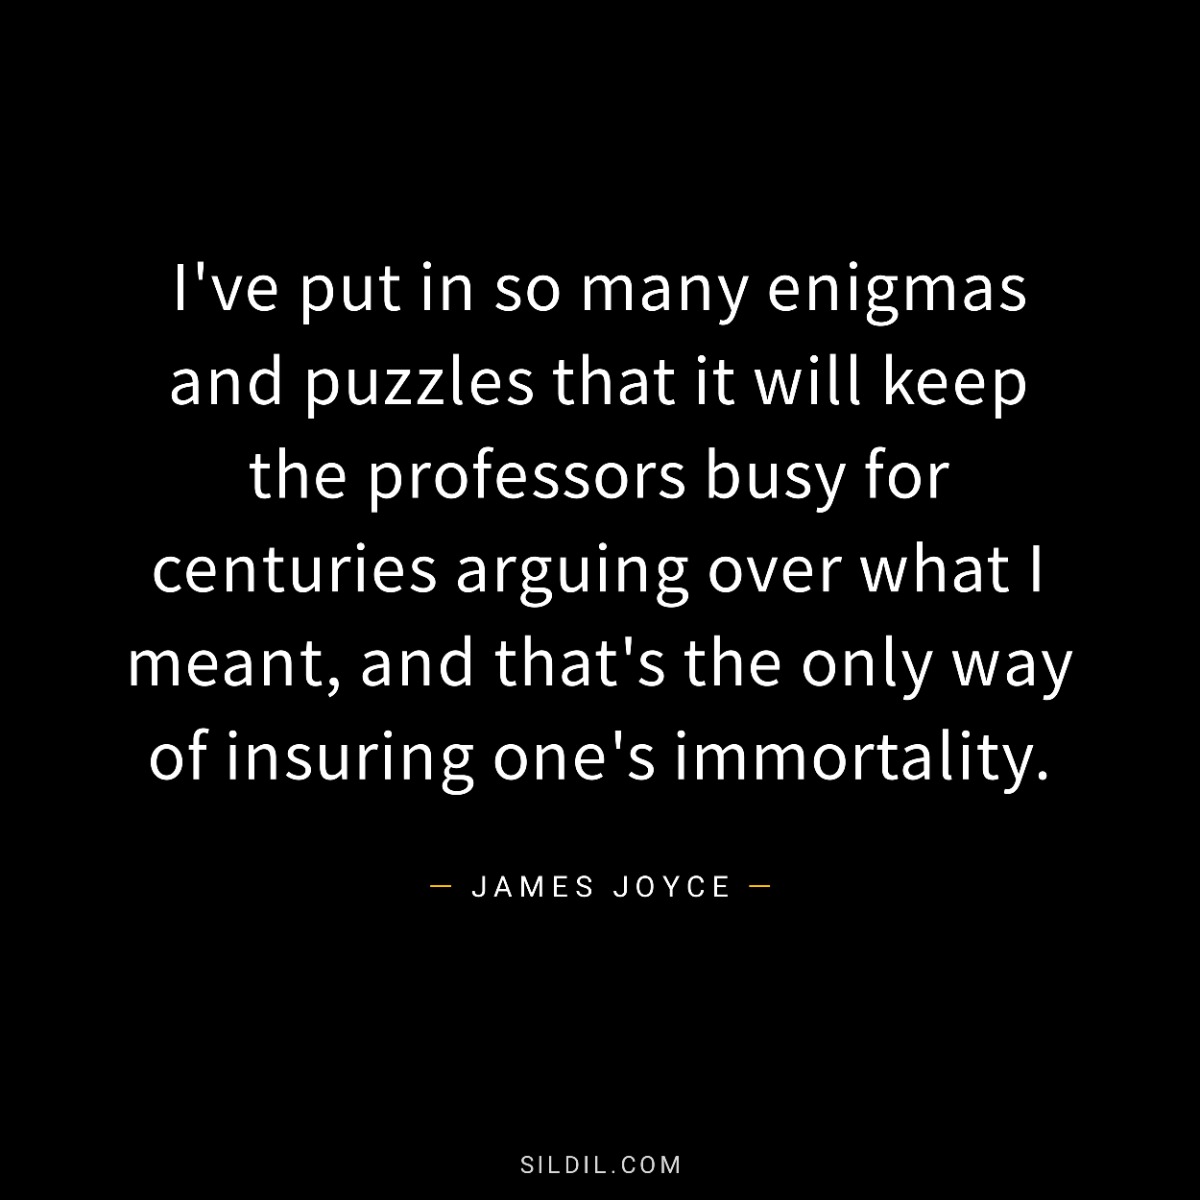 I've put in so many enigmas and puzzles that it will keep the professors busy for centuries arguing over what I meant, and that's the only way of insuring one's immortality.